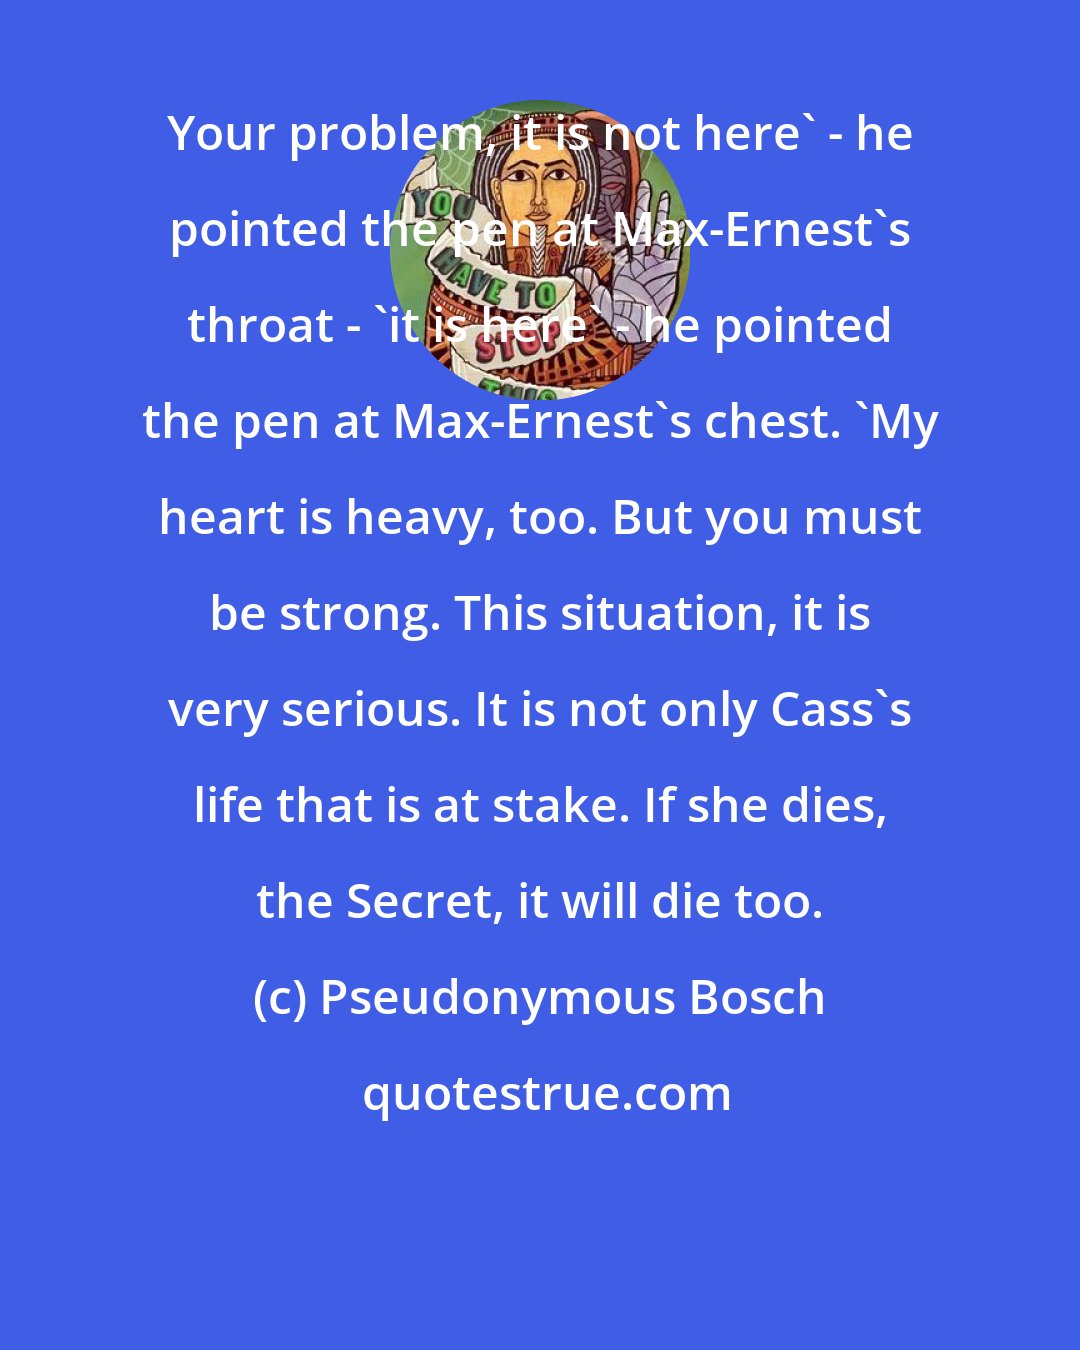 Pseudonymous Bosch: Your problem, it is not here' - he pointed the pen at Max-Ernest's throat - 'it is here' - he pointed the pen at Max-Ernest's chest. 'My heart is heavy, too. But you must be strong. This situation, it is very serious. It is not only Cass's life that is at stake. If she dies, the Secret, it will die too.